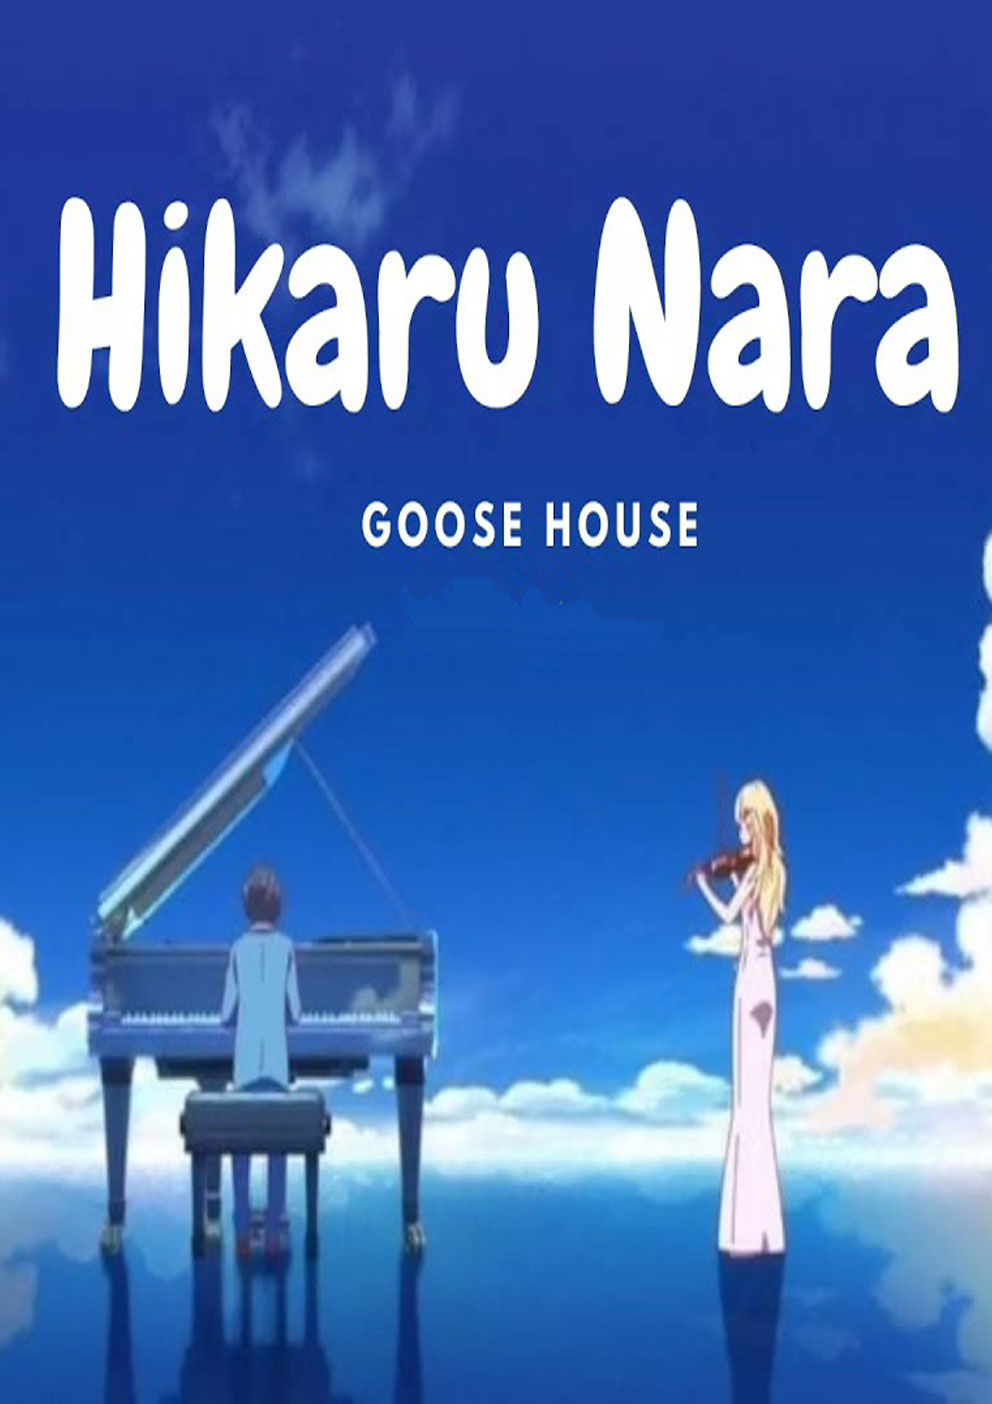 hikaru nara from your lie in april #piano #pianomusic #music #pianocov, Piano Cover